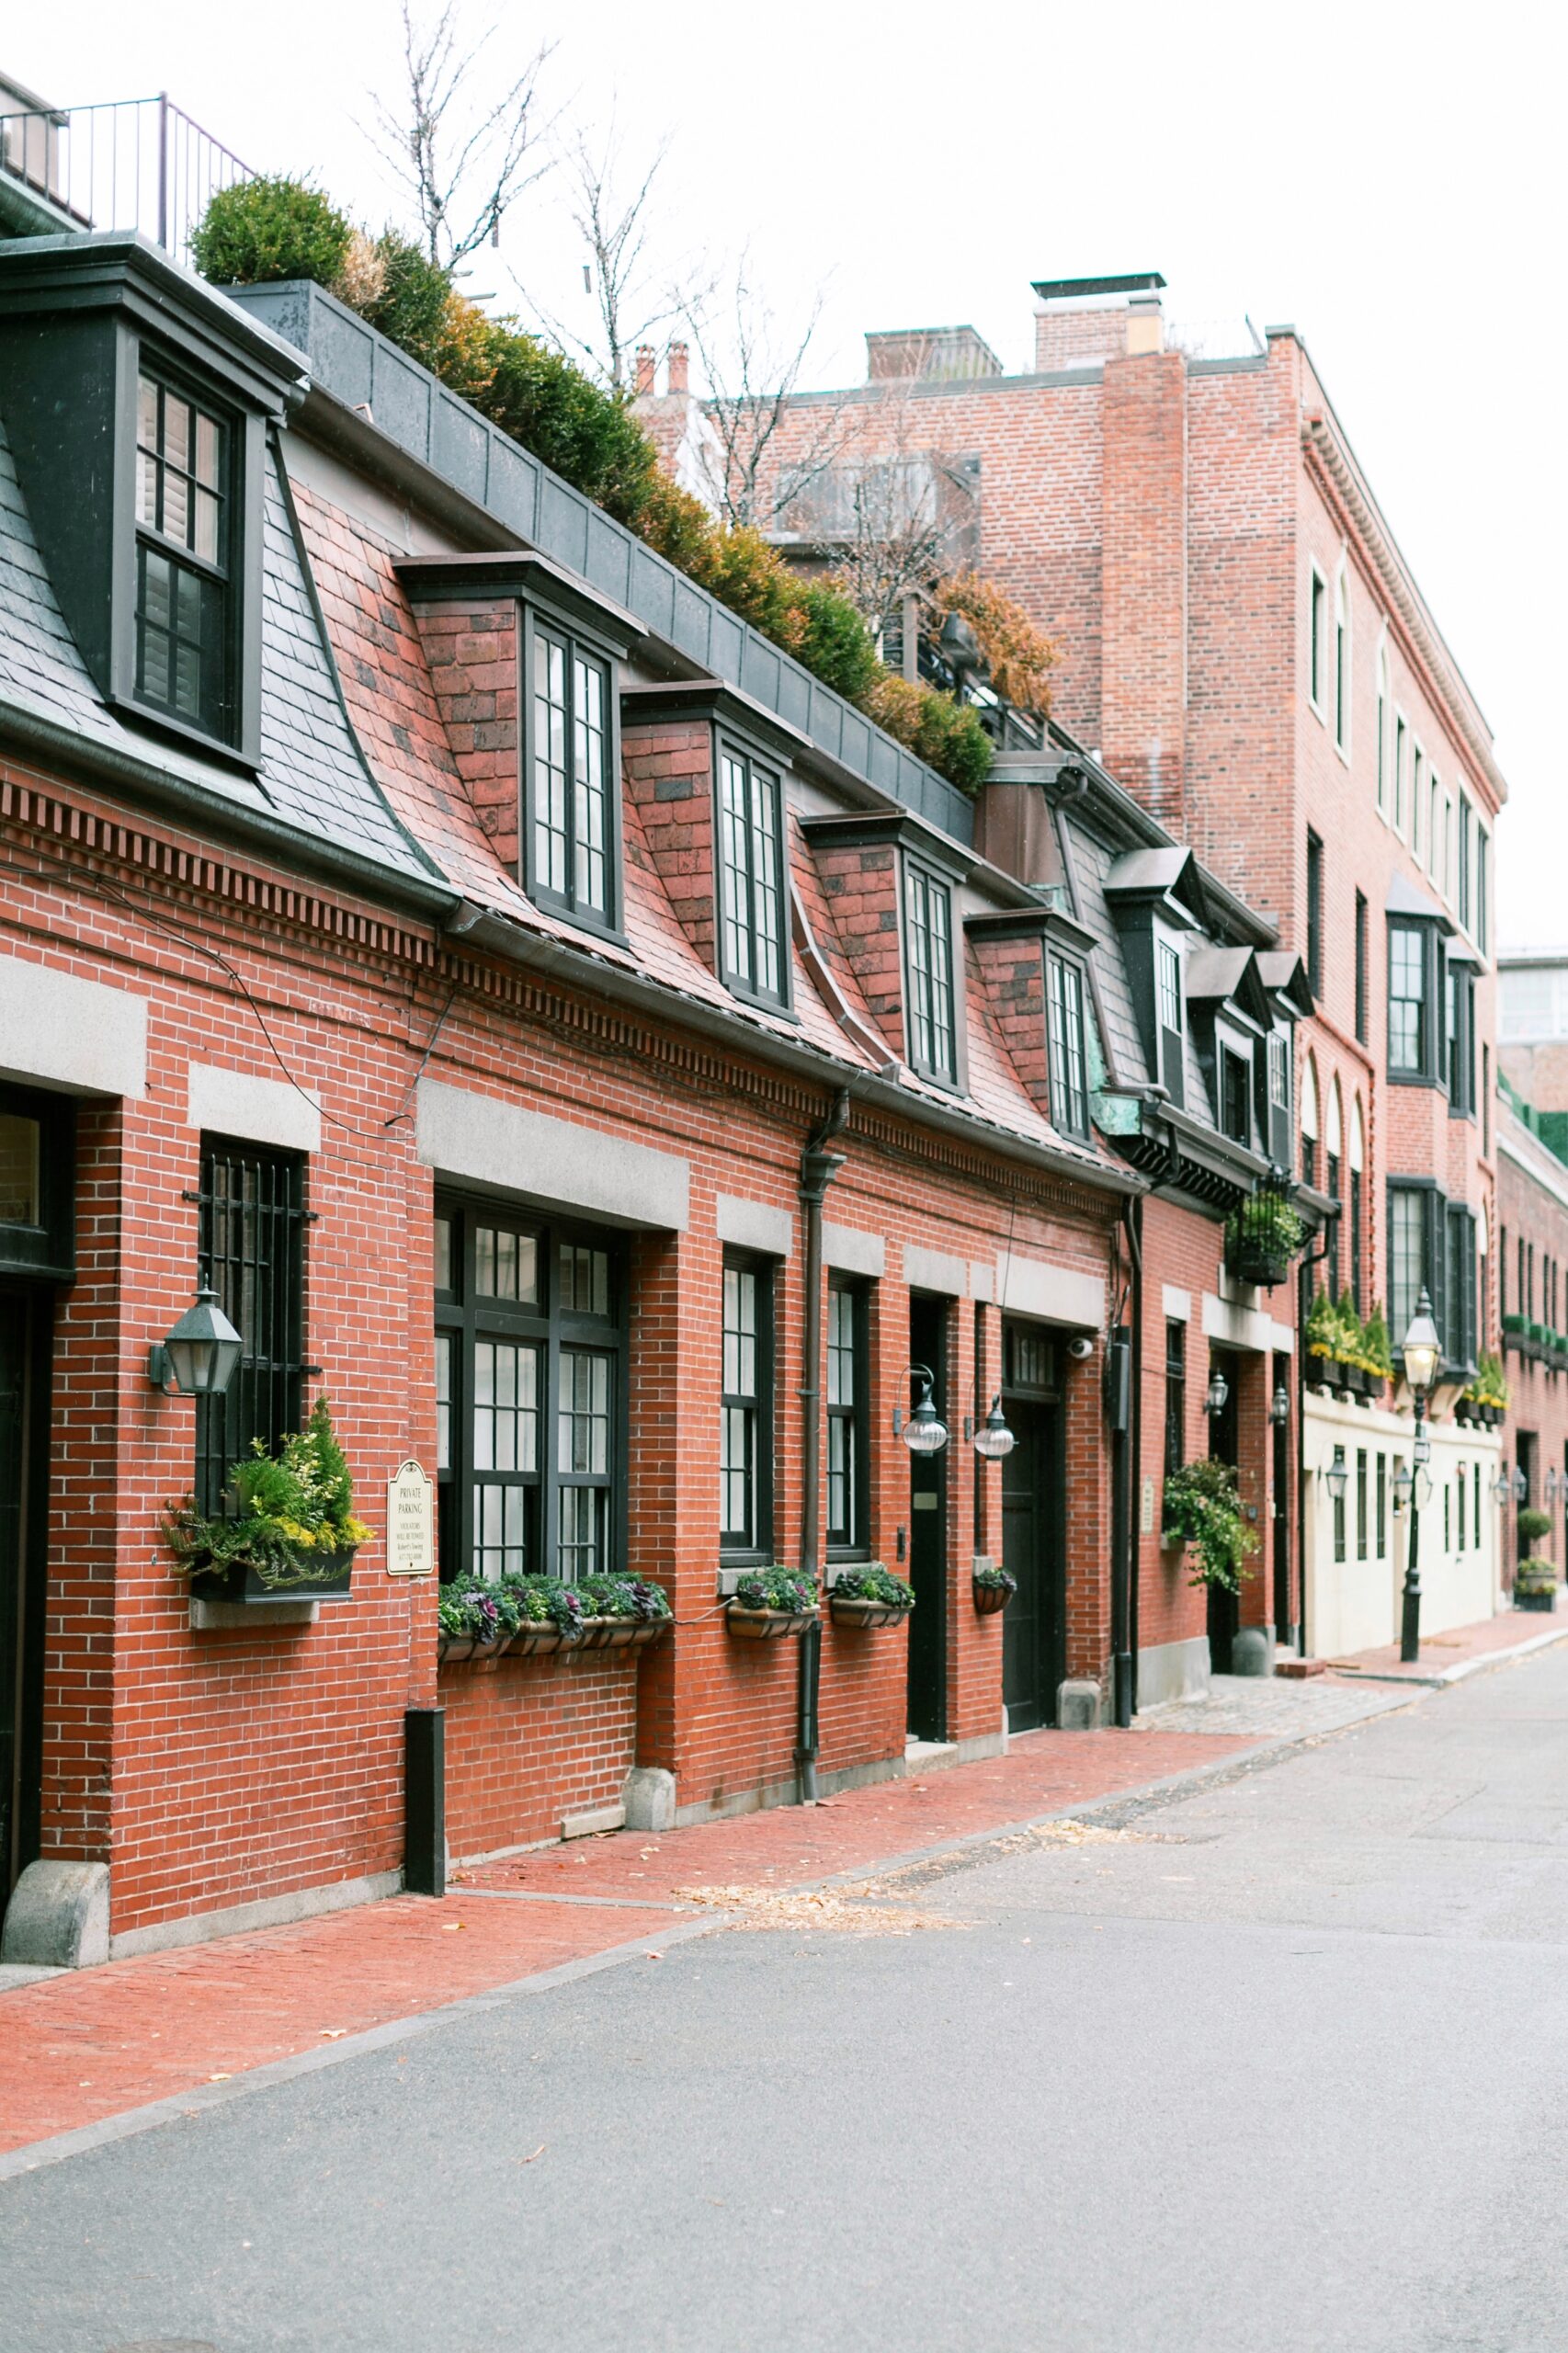 Visiting Boston? These are the must see and cannot miss sights and attractions in Boston, including the best parks, museums, shopping, historic sites, and places to eat throughout the city! | glitterinc.com | @glitterinc